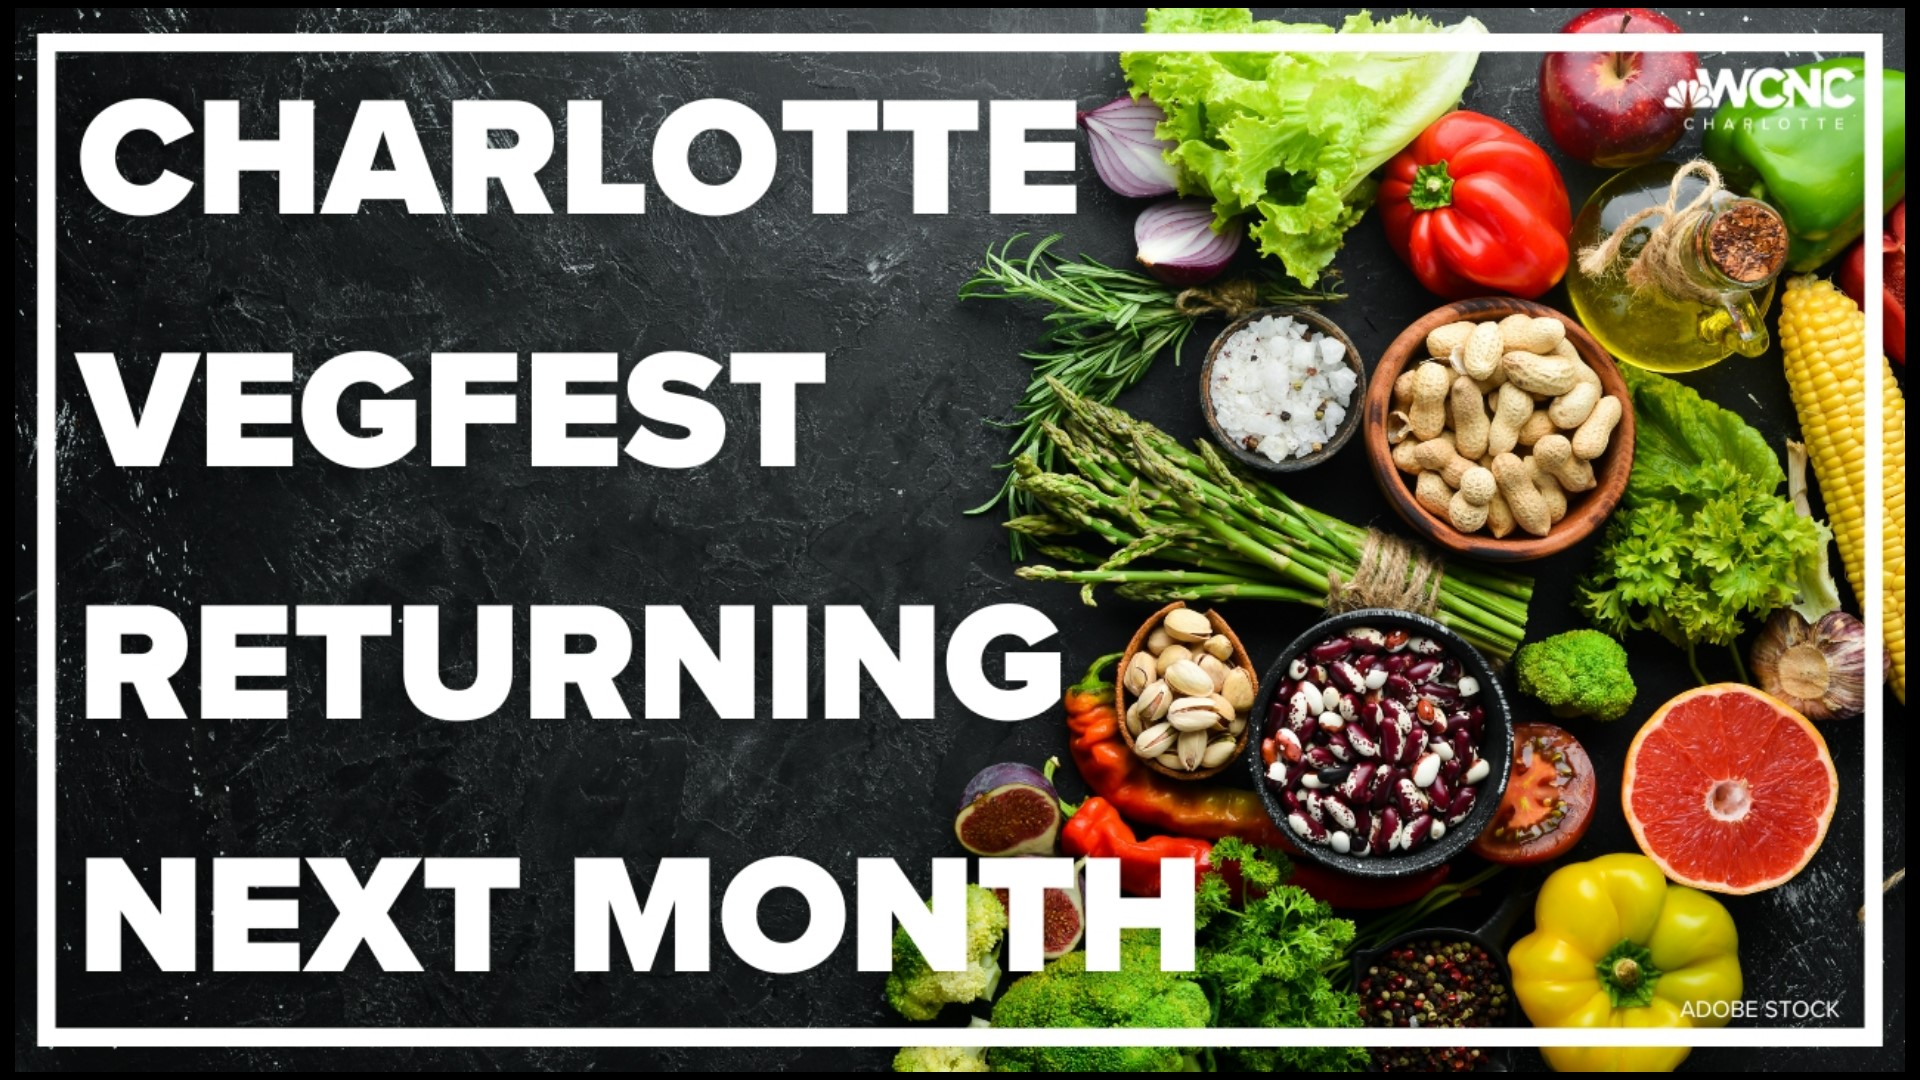 'Charlotte Vegfest' is back this year after a three-year pandemic hiatus.